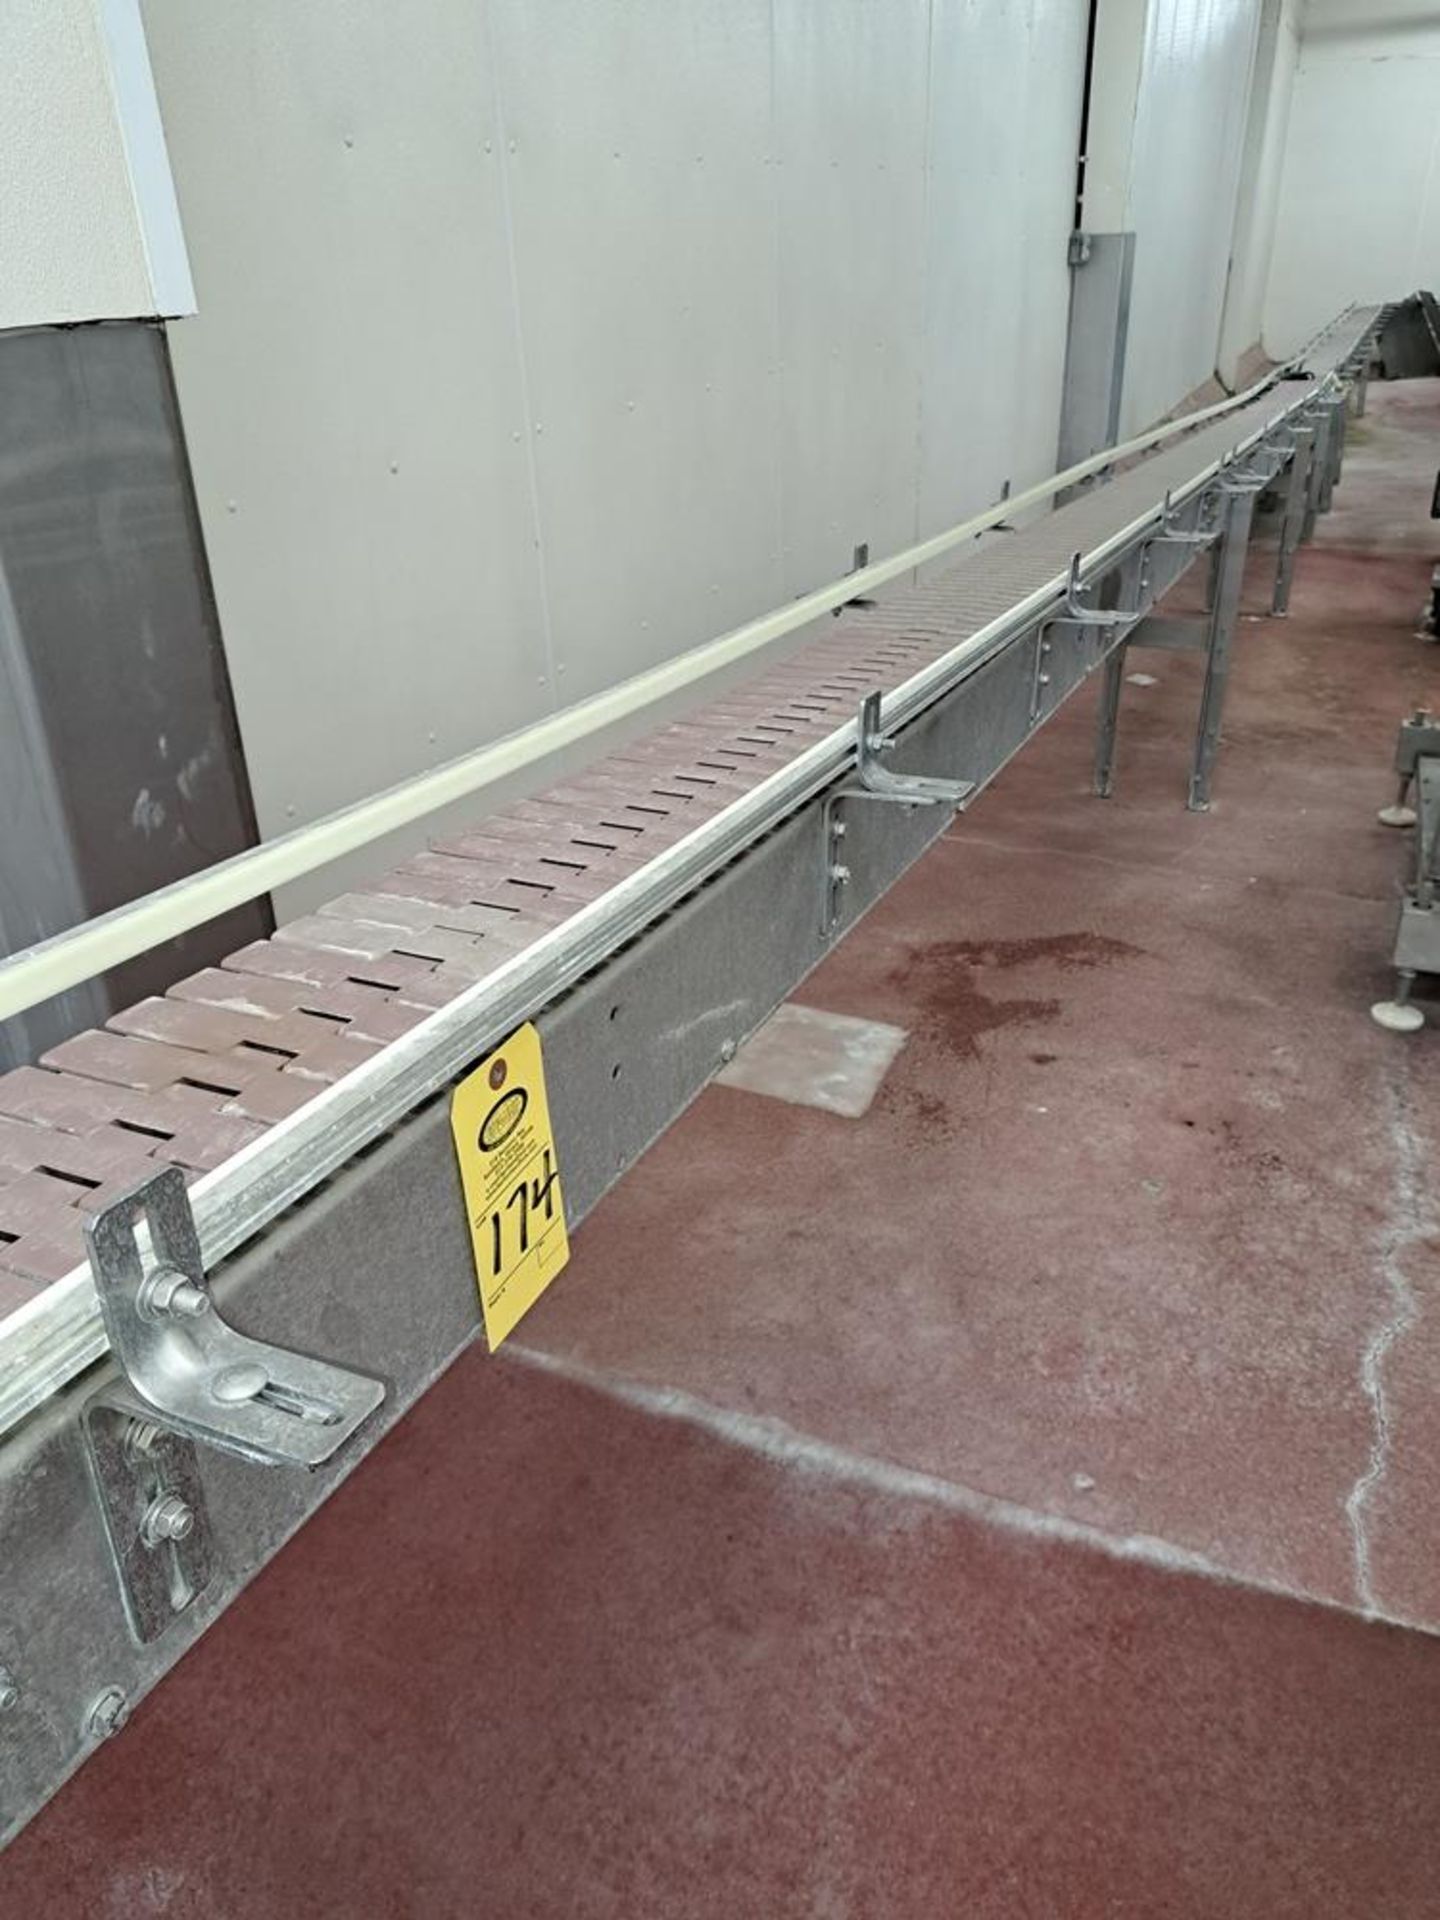 Lot Double Lane Conveyor, 10" wide X approx. 200' long plastic belts, Electric Drives: Required - Image 2 of 11